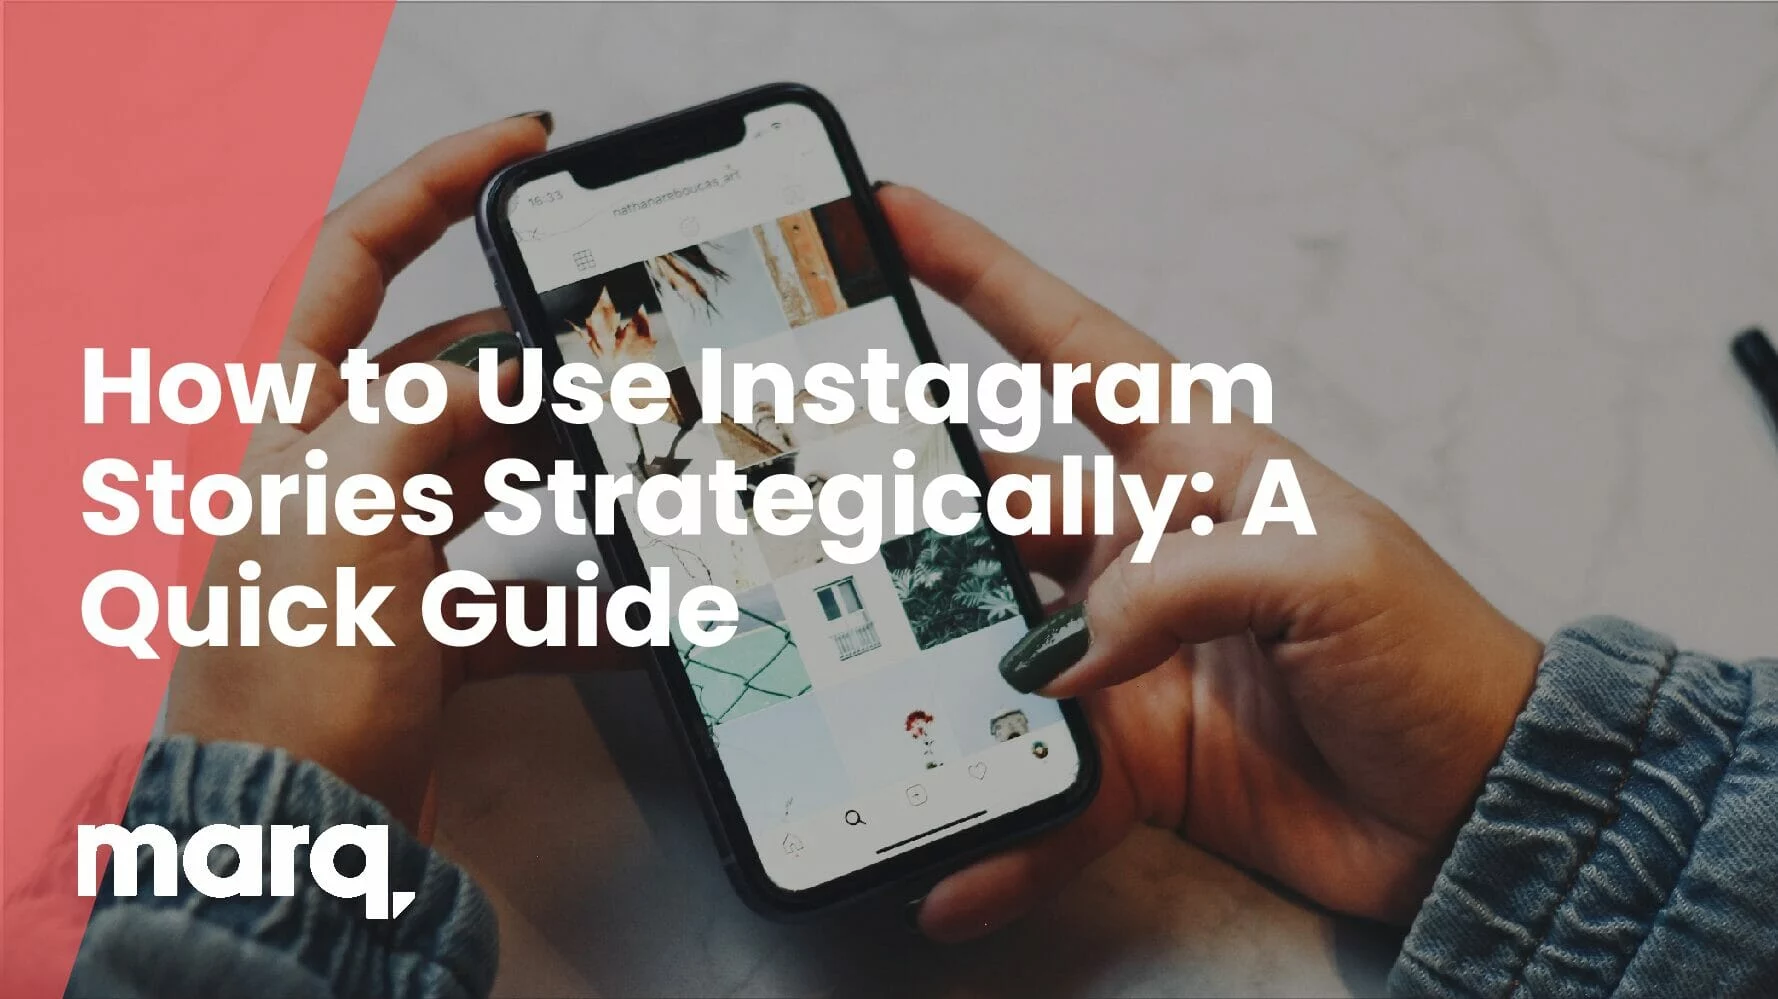 How to Use Instagram Stories Strategically